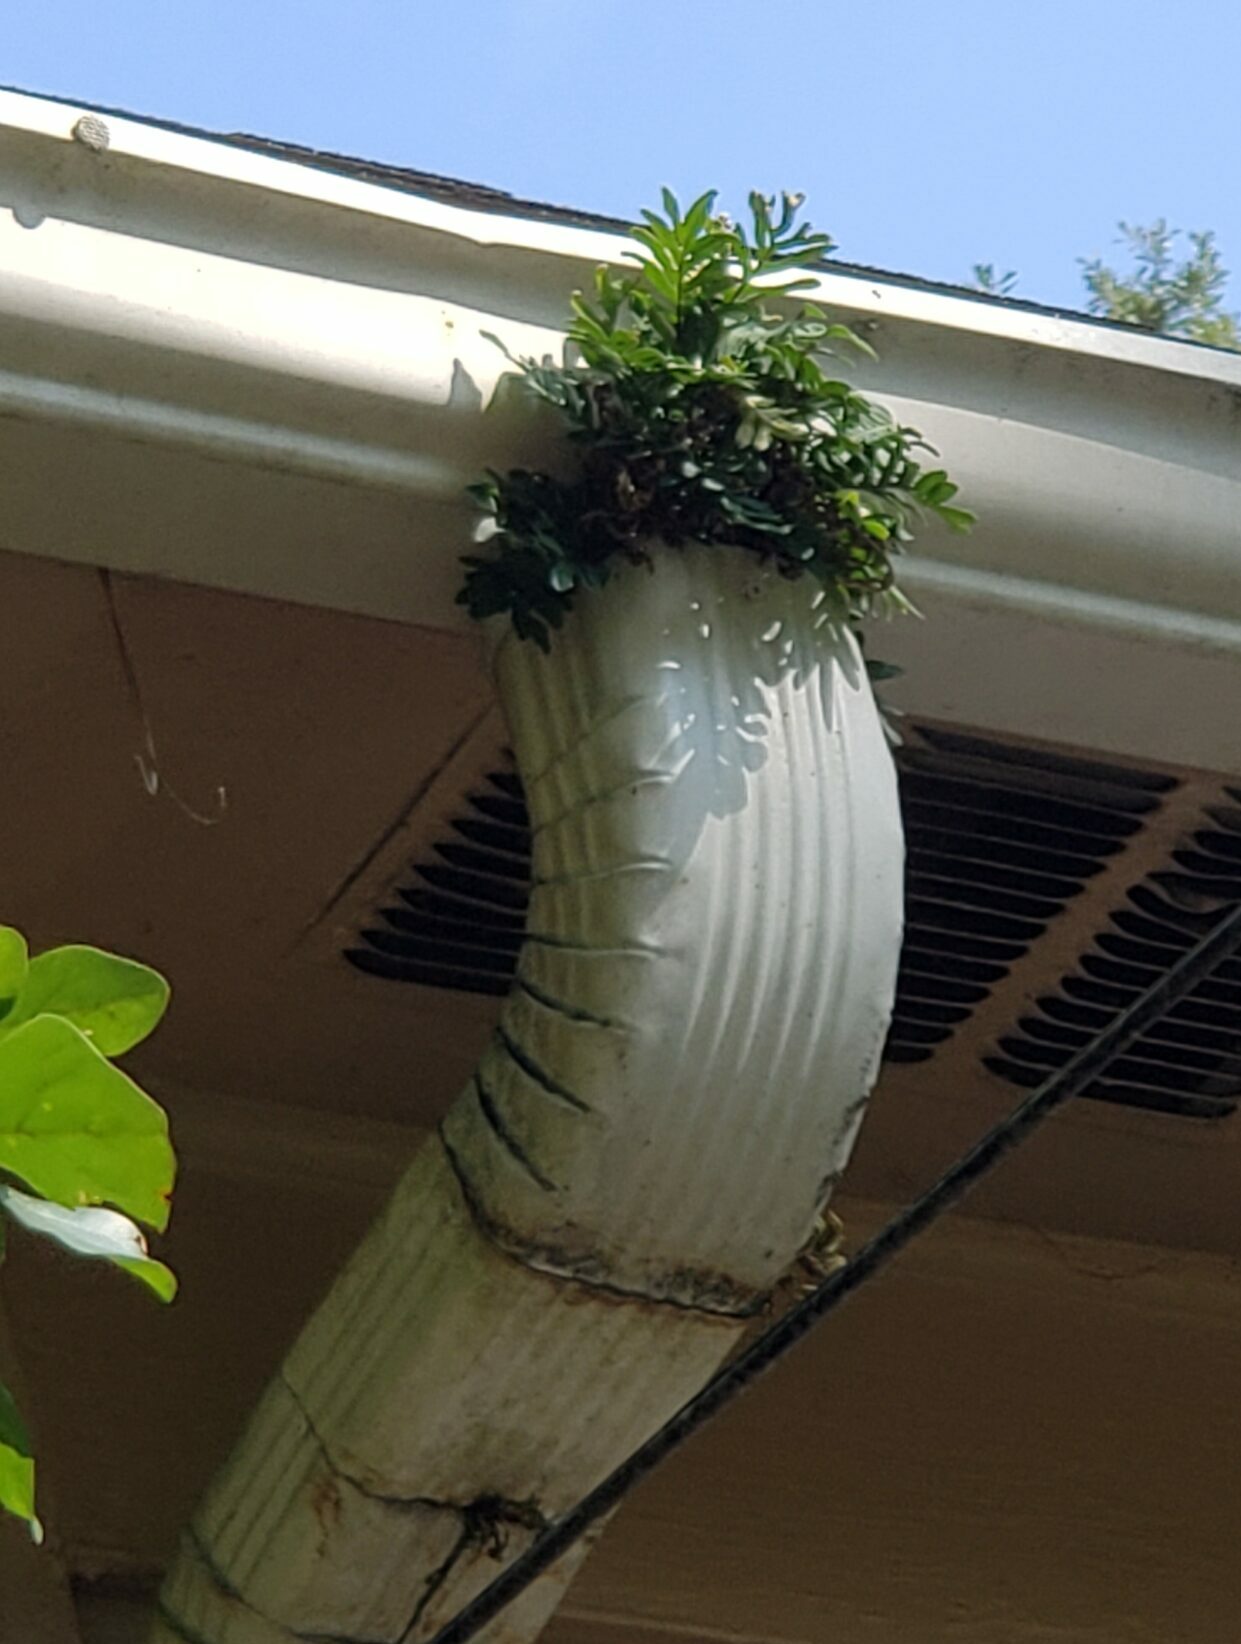 Image contains a pictures of a gutter attached to a down spout. The downspout has greenery growing out of it. It has not been cleaned for a long time.